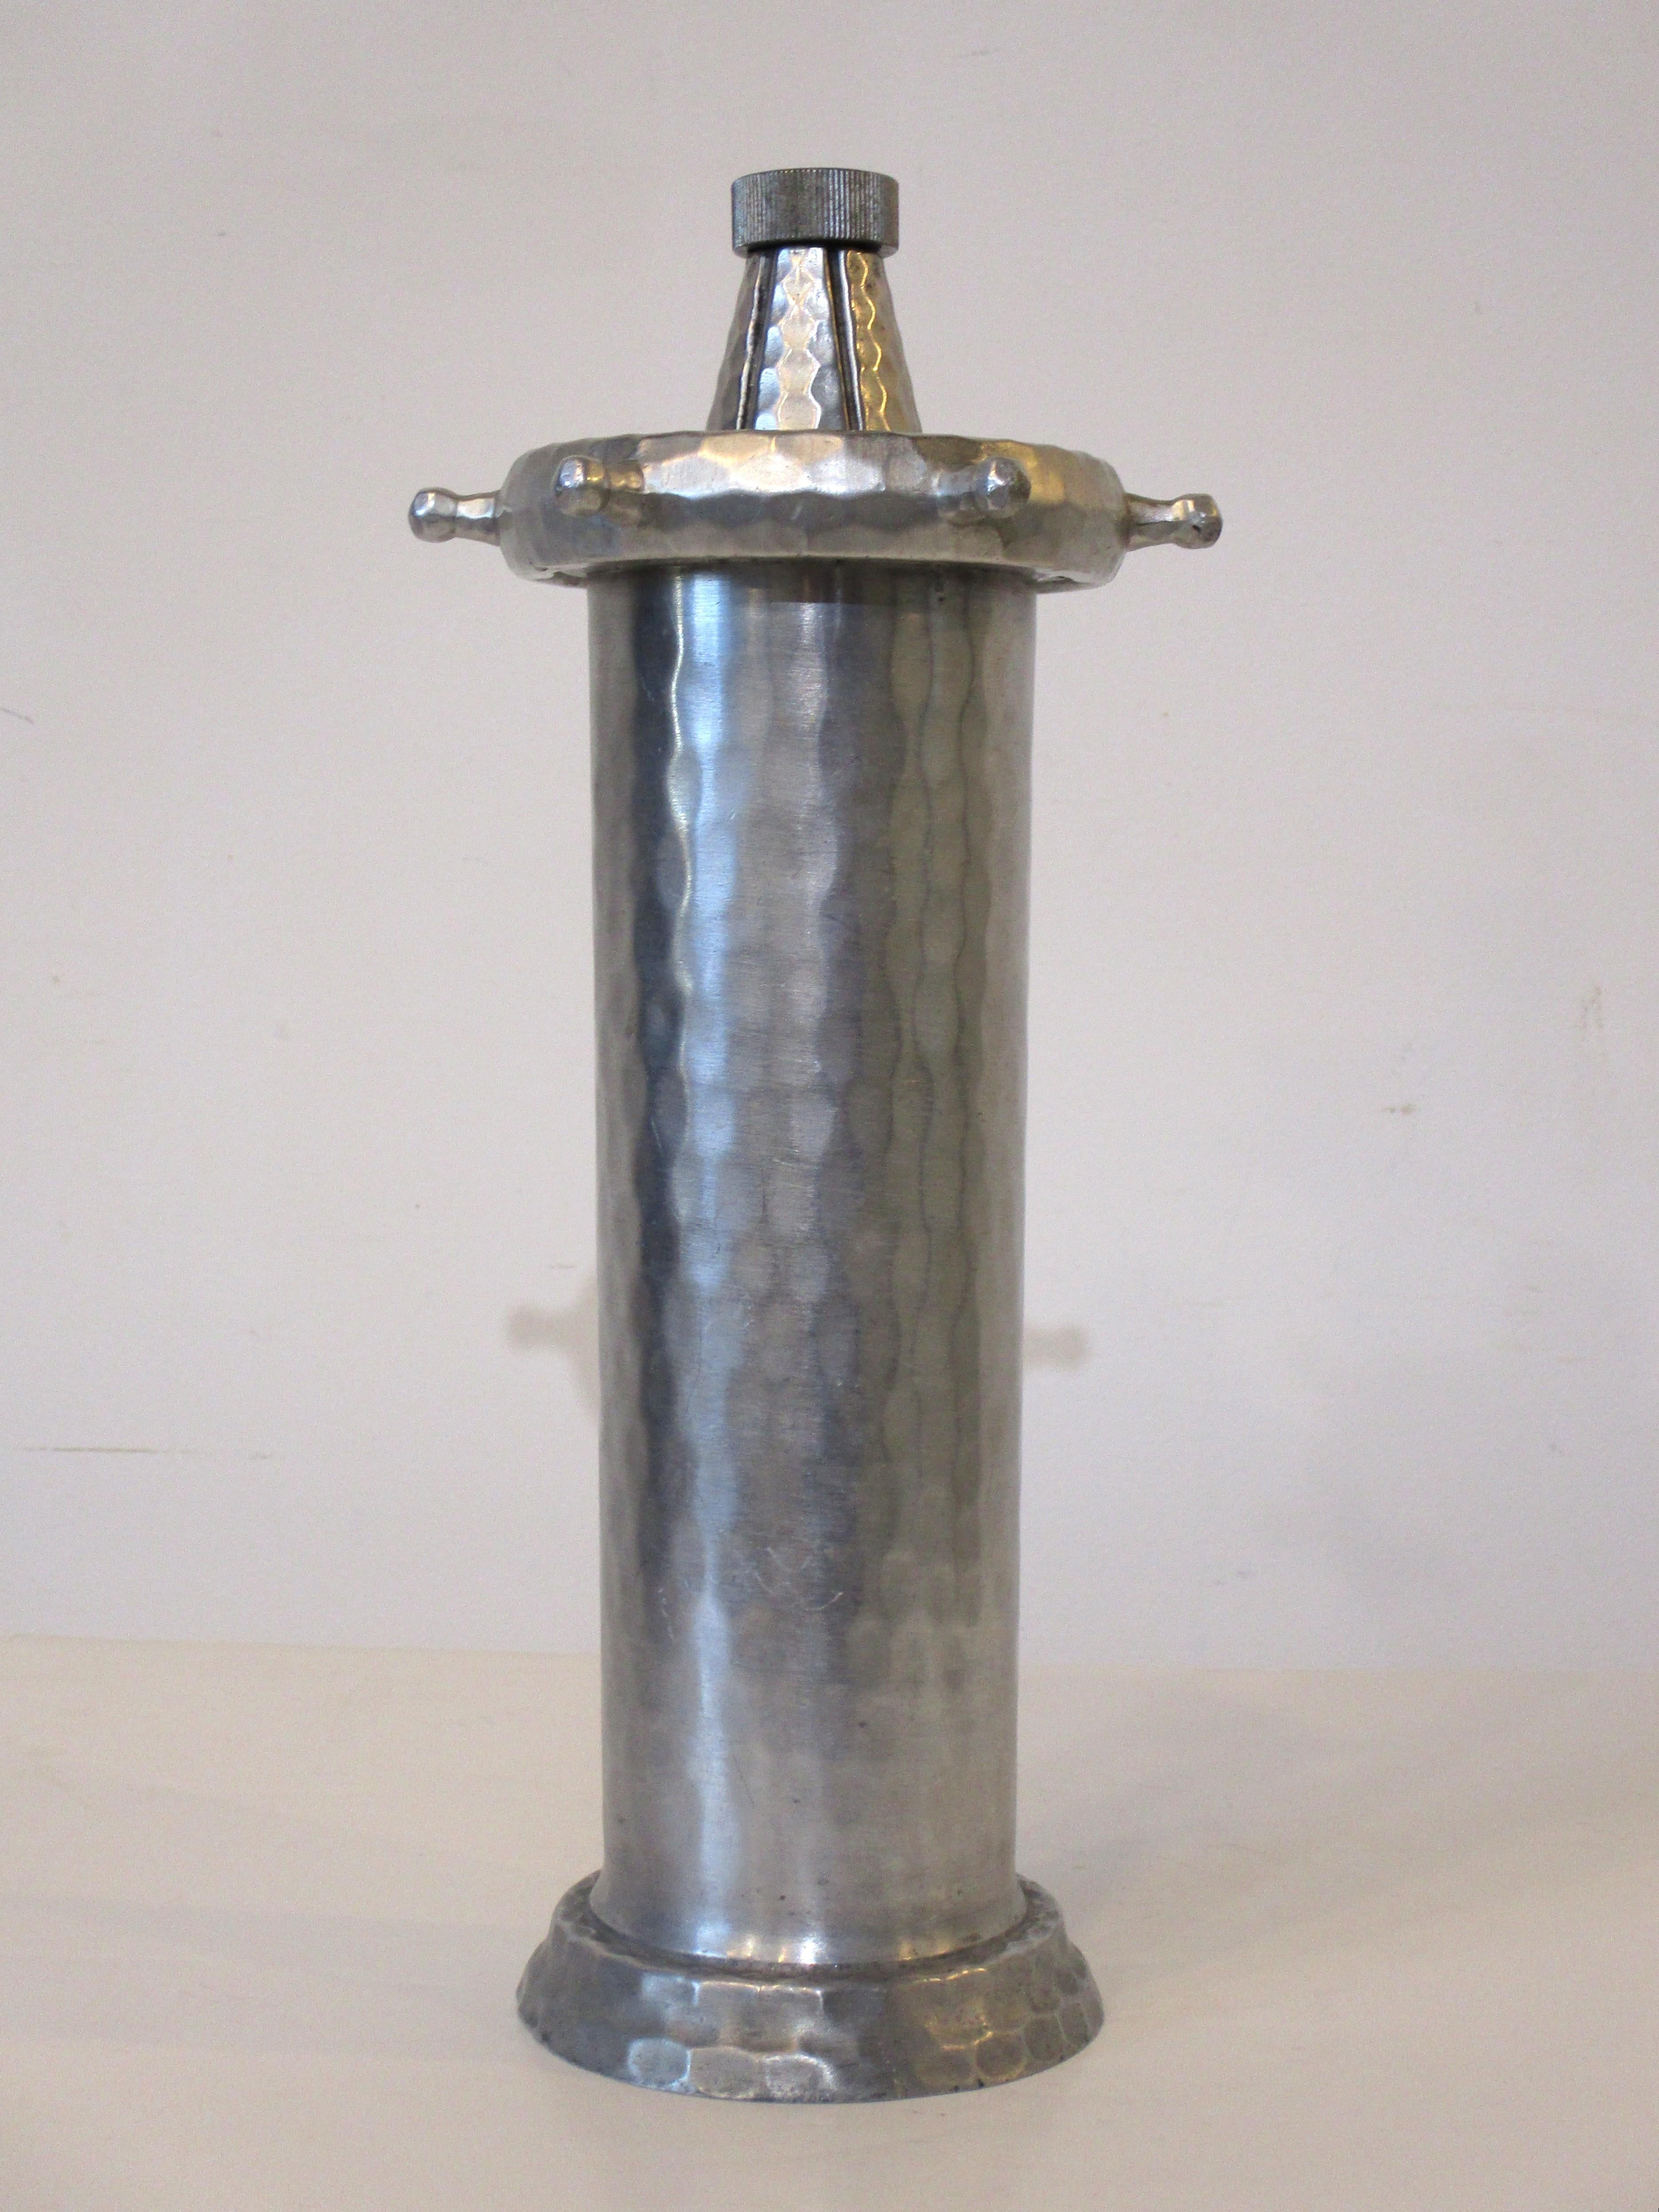 A hand forged hammered aluminum nautical themed cocktail shaker with the top as a ships wheel with three boat anchors. The wheel top screws off for liquids and it has a cap with built in strainer for pouring manufactured by the Everlast Metal